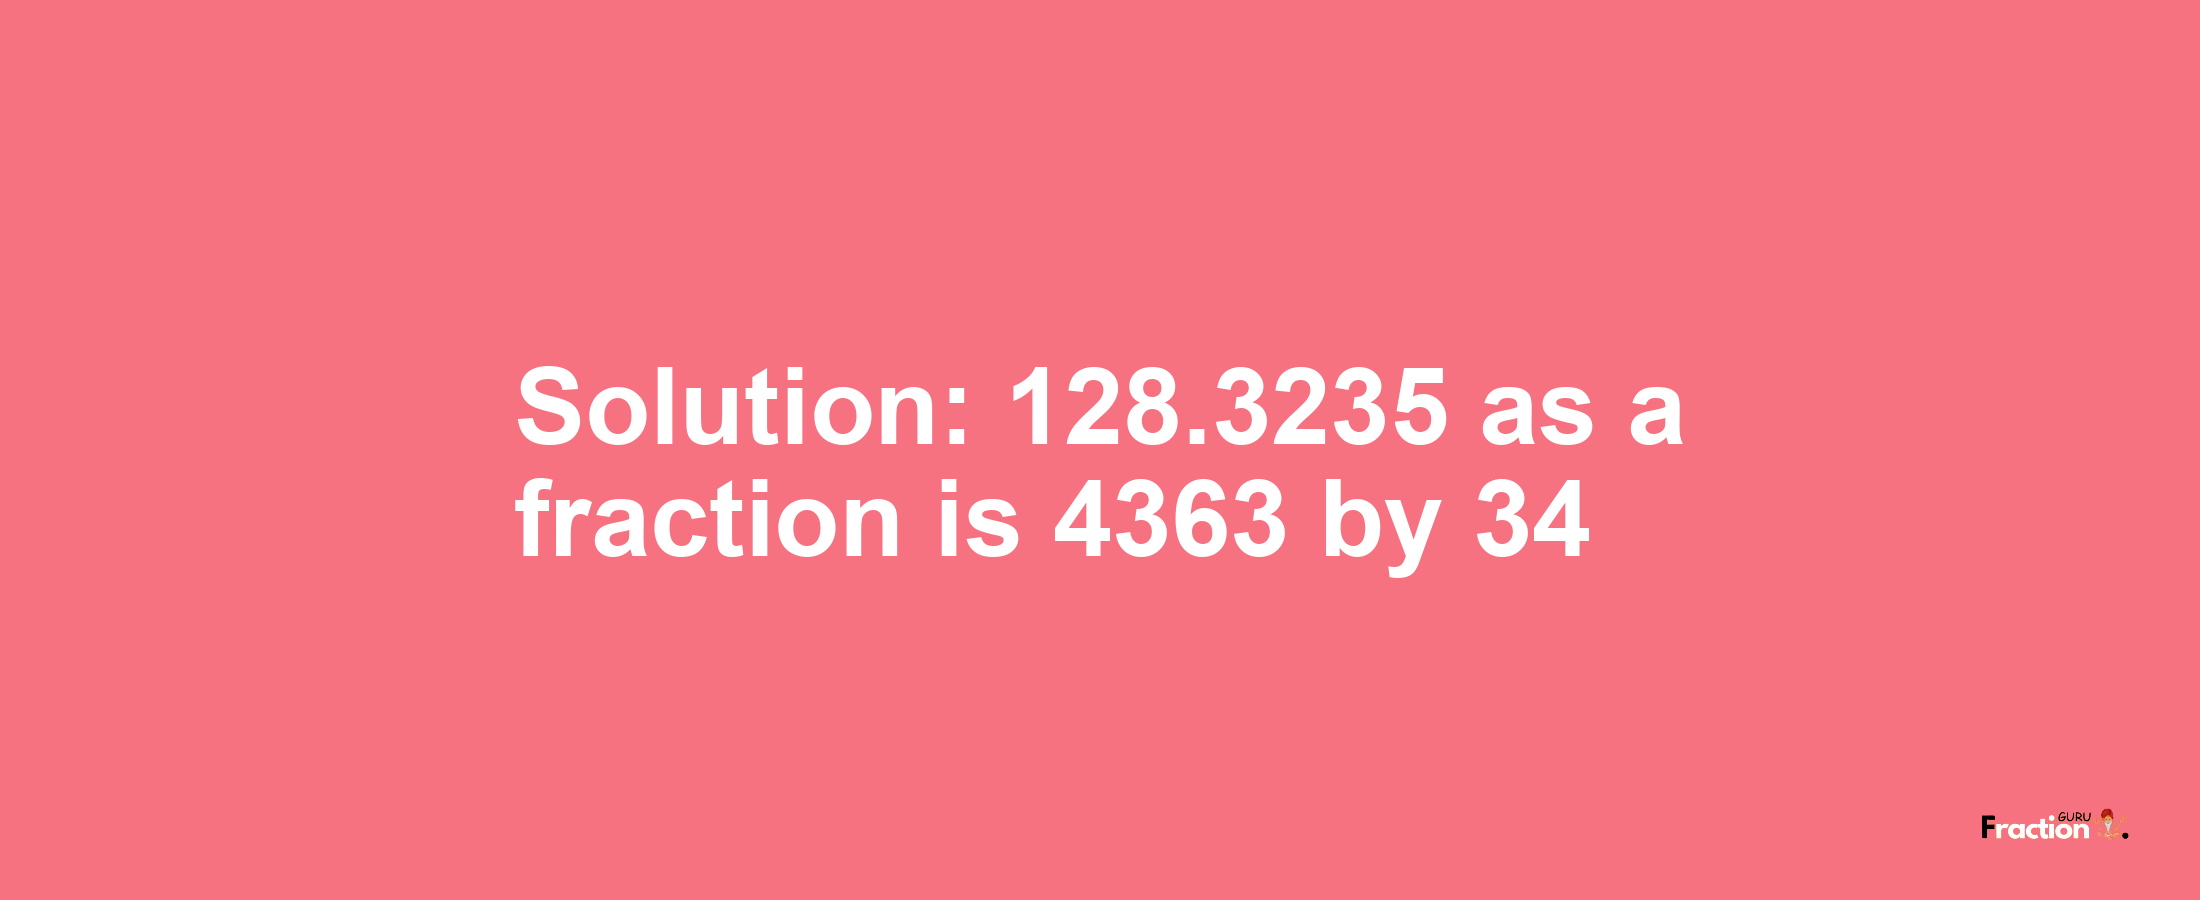 Solution:128.3235 as a fraction is 4363/34